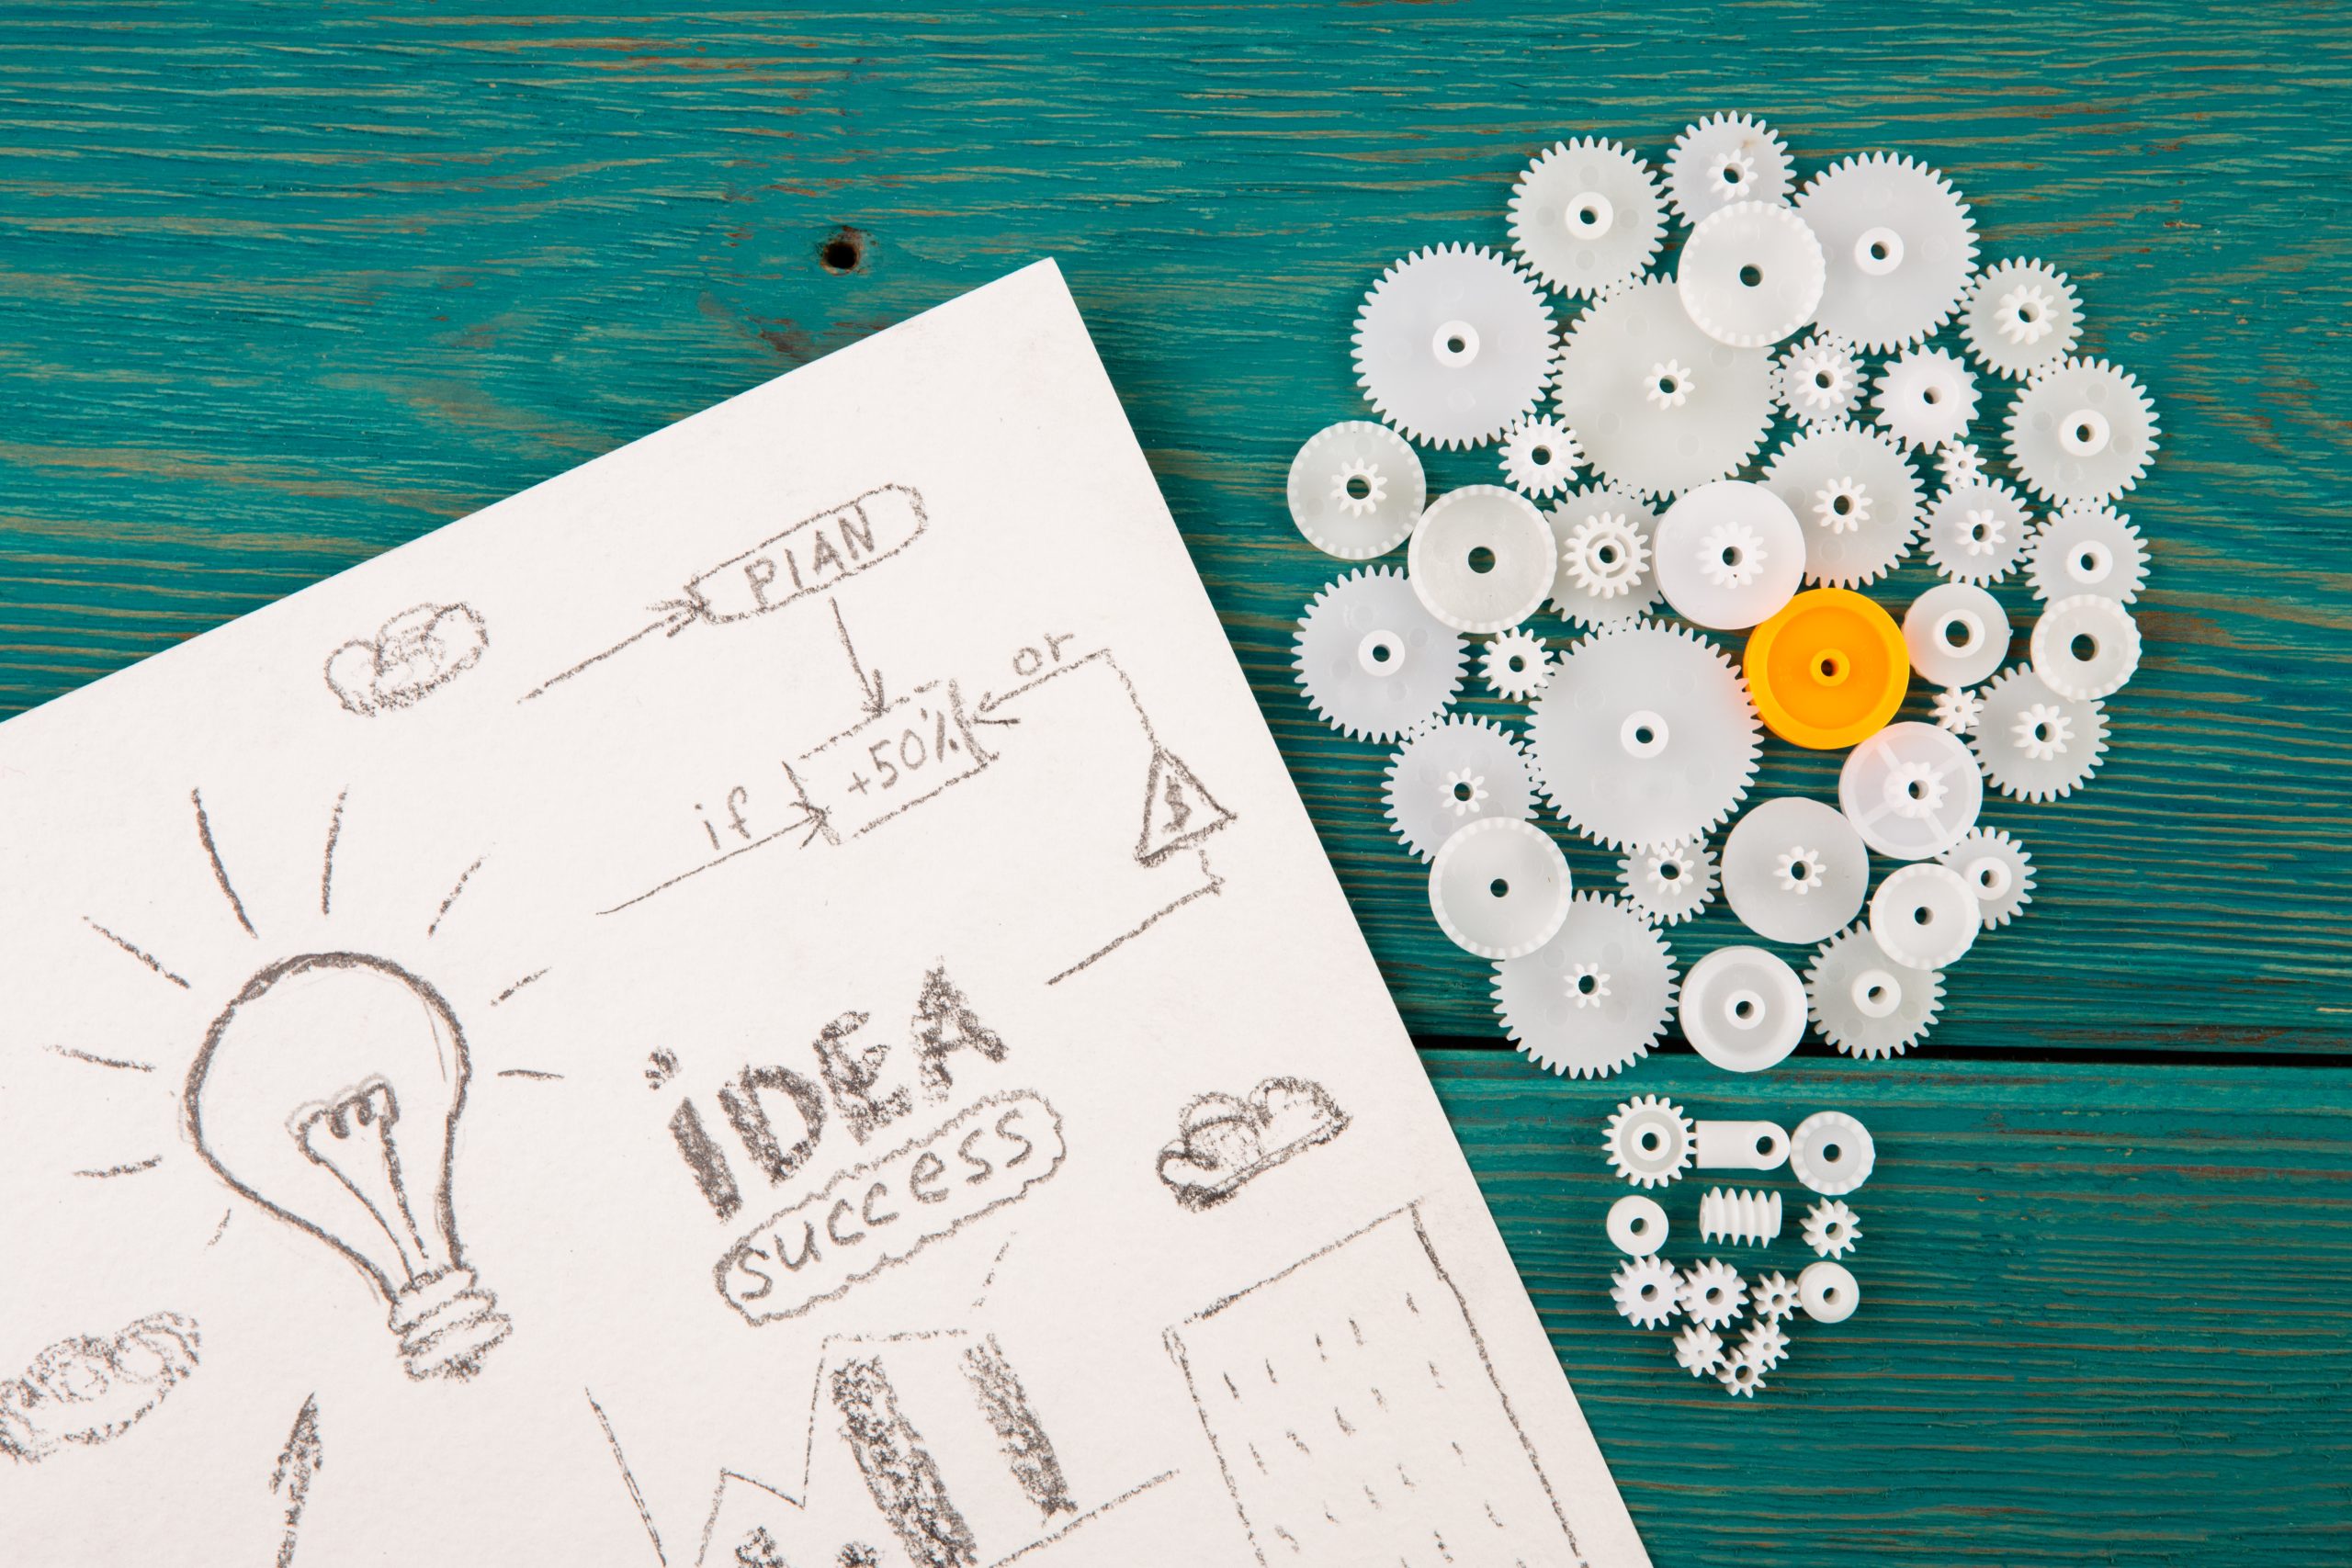 Idea,Concept,-,Bulb,Composed,Of,The,Gears,And,Sketches